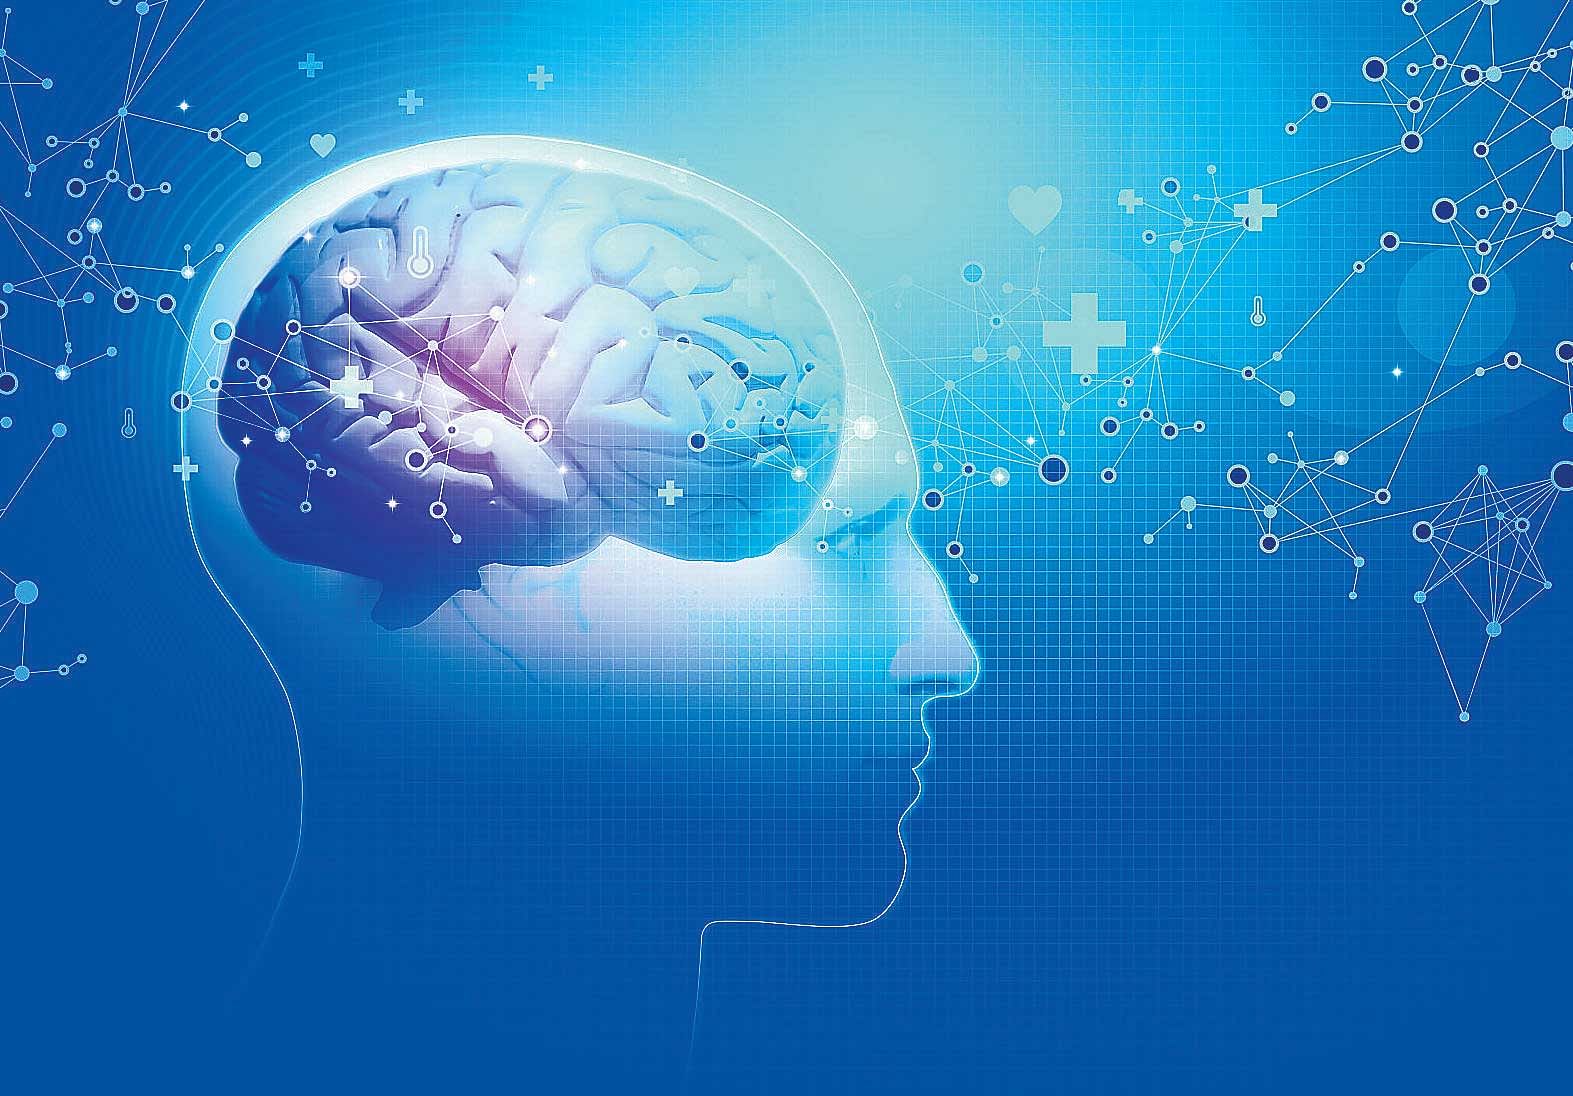 Applying magnetic pulses to the brain can help treat depression. File Photo